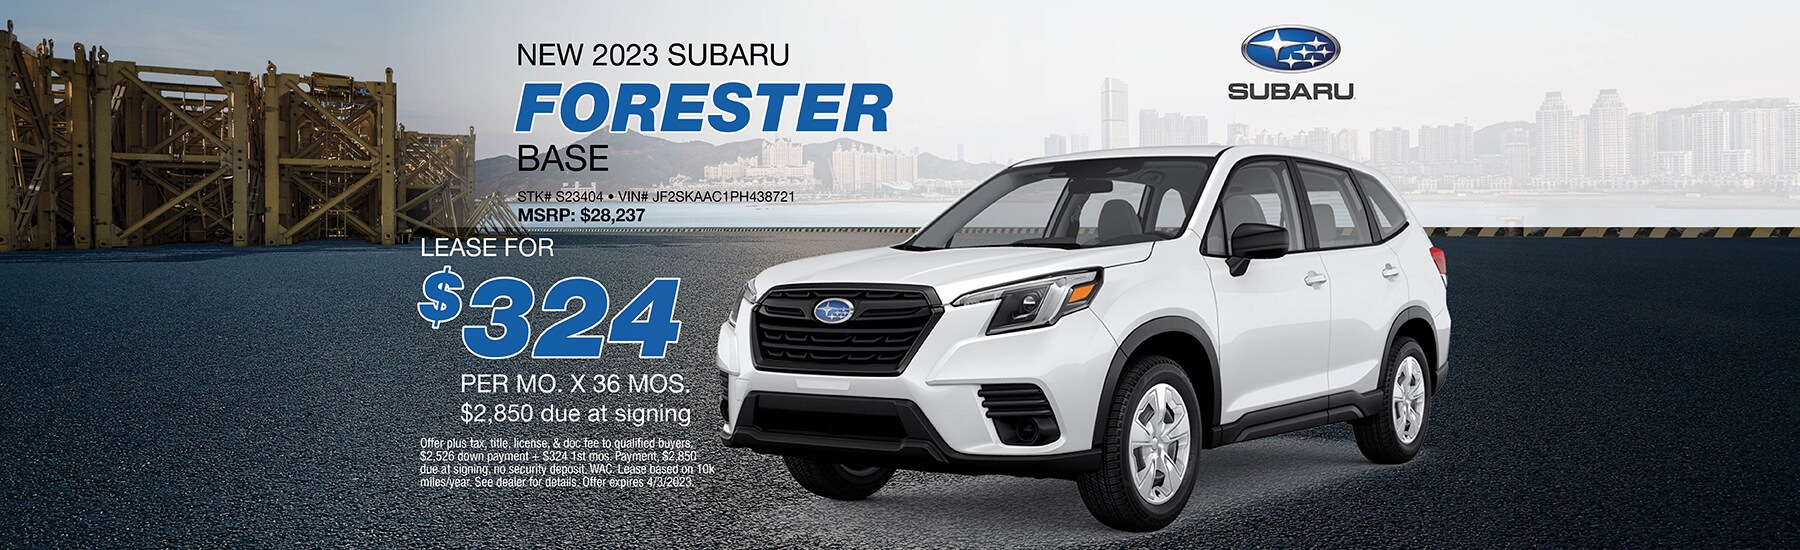 Lease a new 2023 Subaru Forester Base for $324 per month for 36 months with $2,850 due at signing. MSRP $28,237 and VIN JF2SKAAC1PH438721